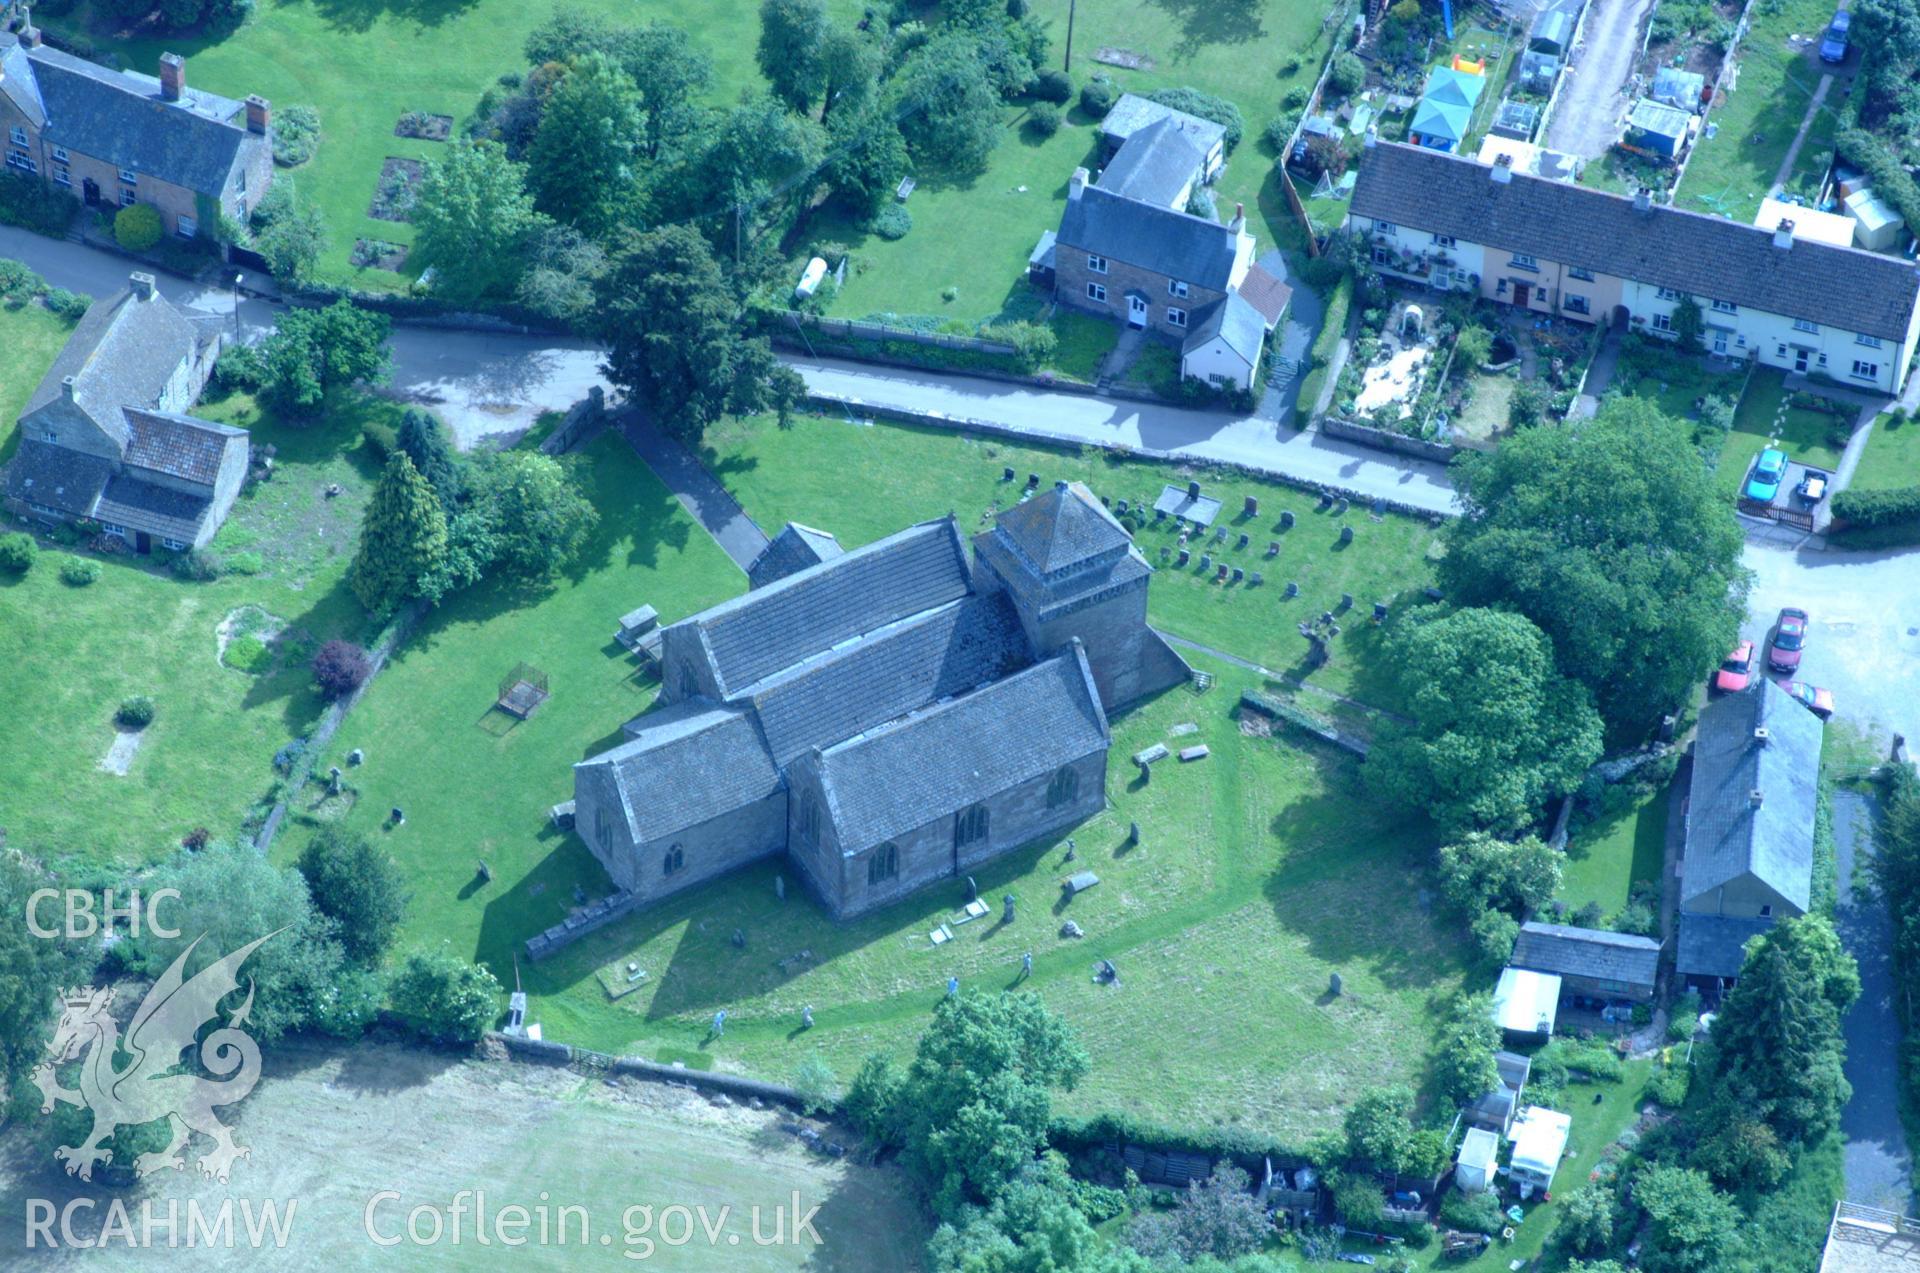 RCAHMW colour oblique aerial photograph of St Bridget's Church, Skenfrith taken on 02/06/2004 by Toby Driver